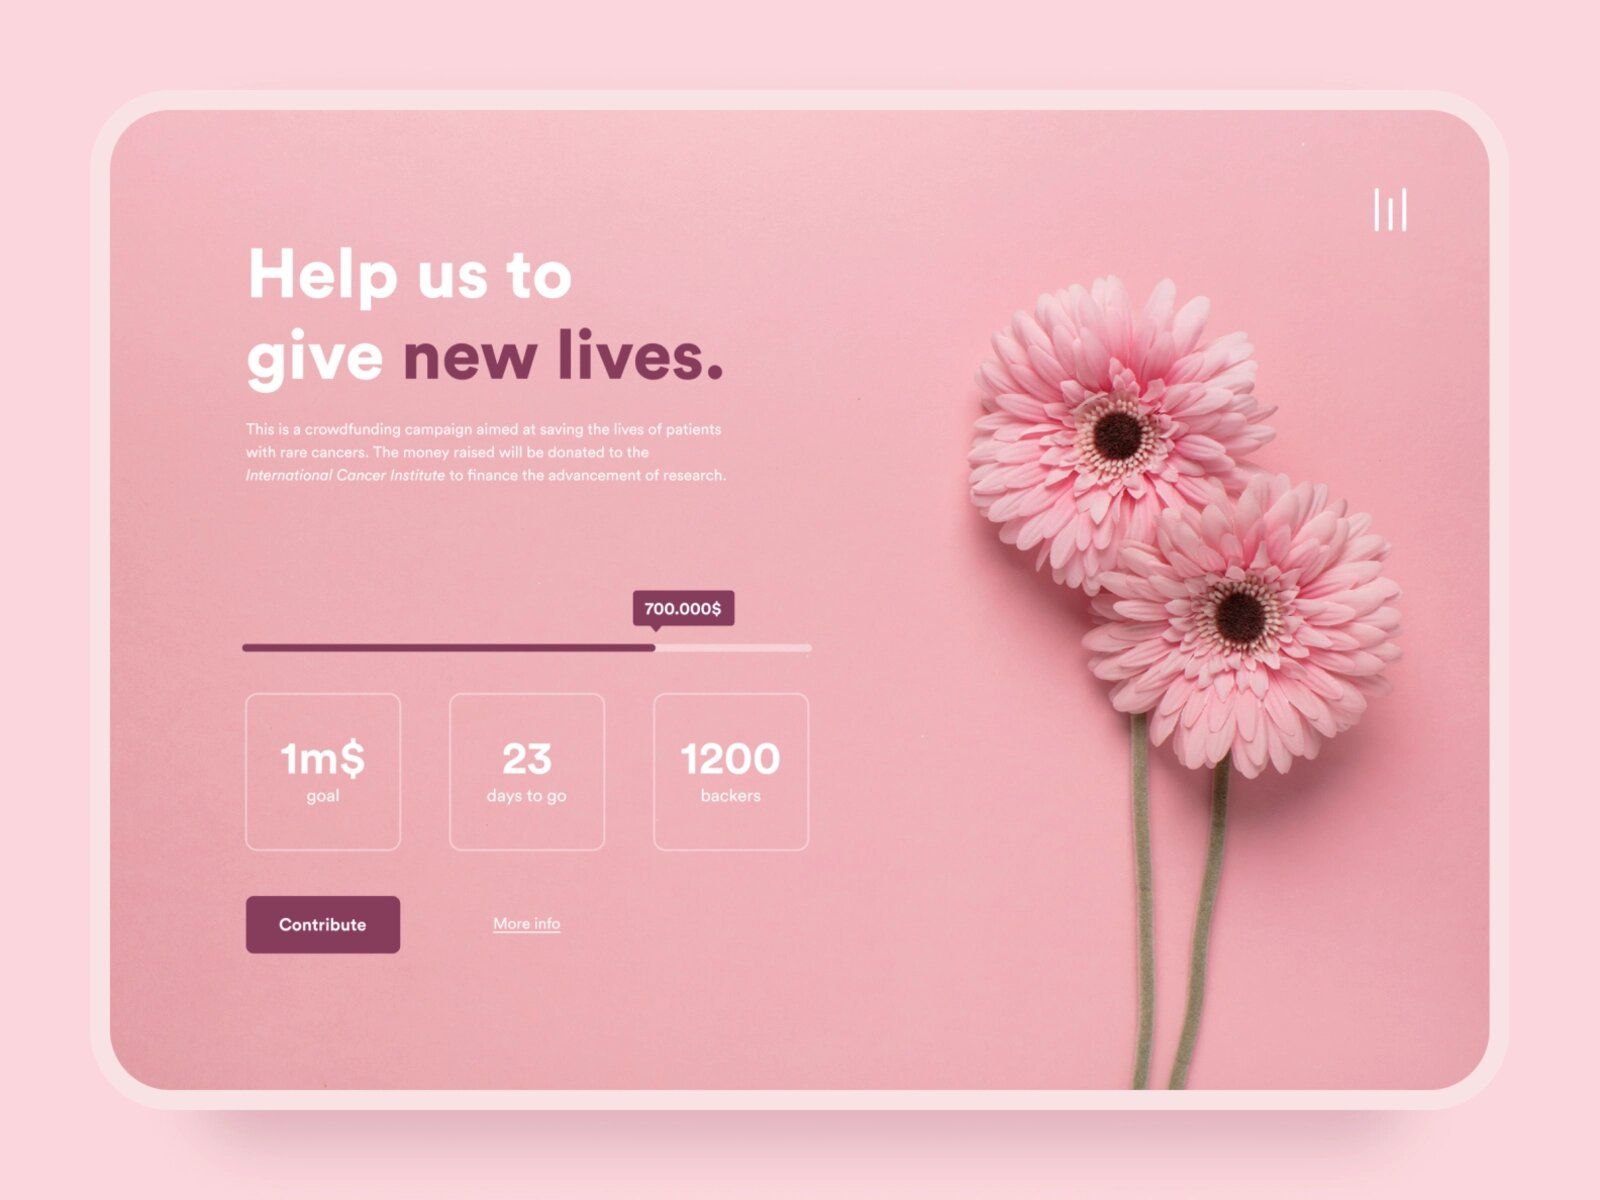 To create a crowdfunding platform that will actually help crowdfunding campaigns raise funds, consider offering various crowdfunding options (equity-based, reward-based, donation-based) (*image by [Cristina Gabrieli](https://dribbble.com/cristinagabrieli){ rel="nofollow" target="_blank" .default-md}*)